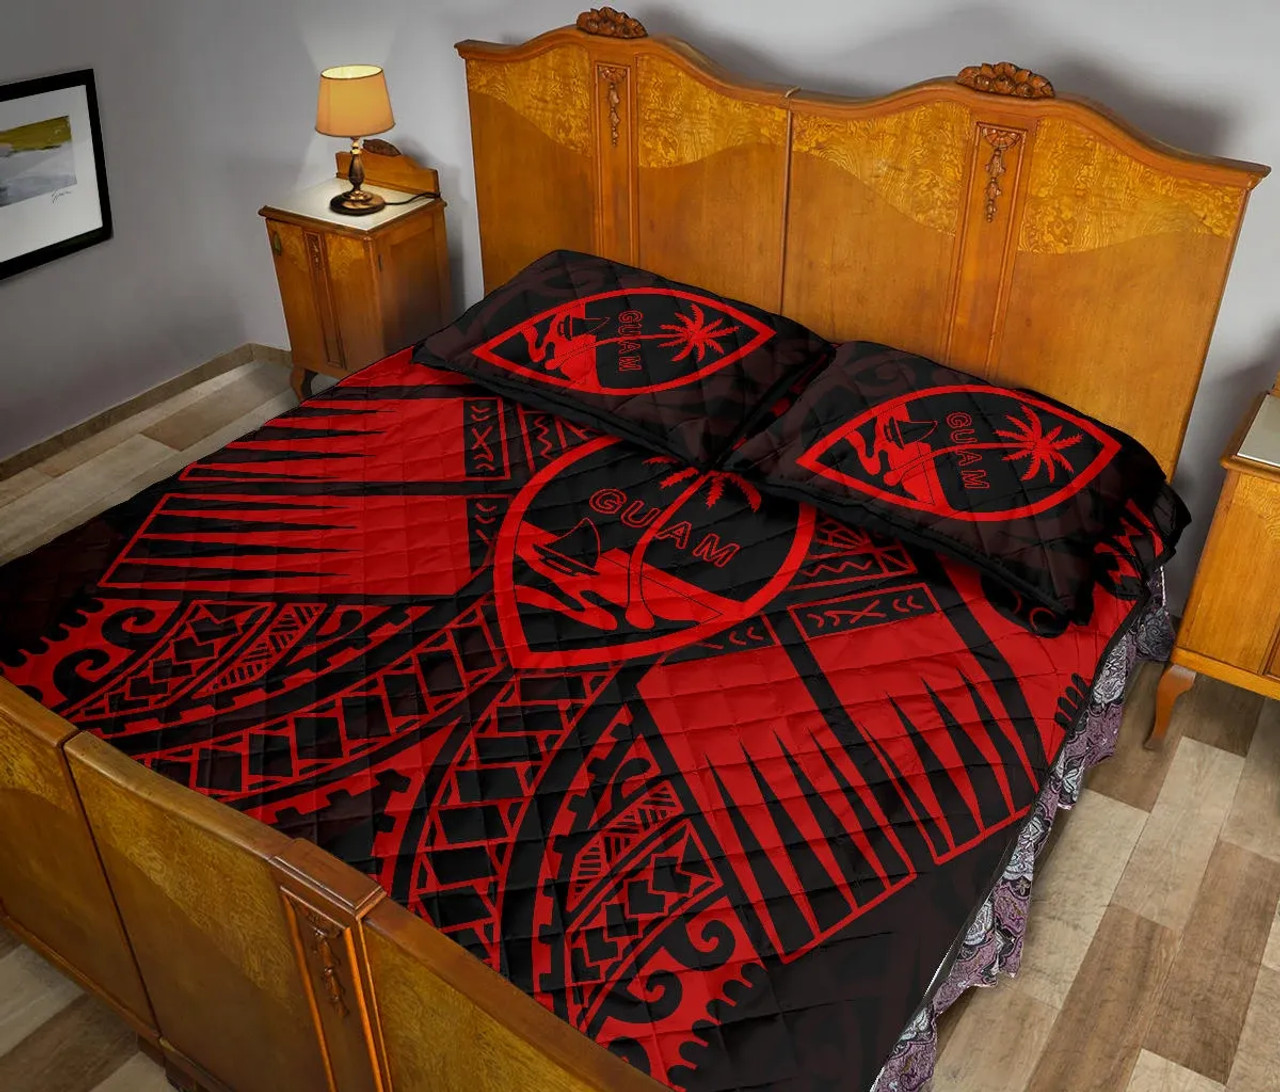 Guam Polynesian Quilt Bed Set - Red Guam Coat Of Arms Polynesian Tattoo 4